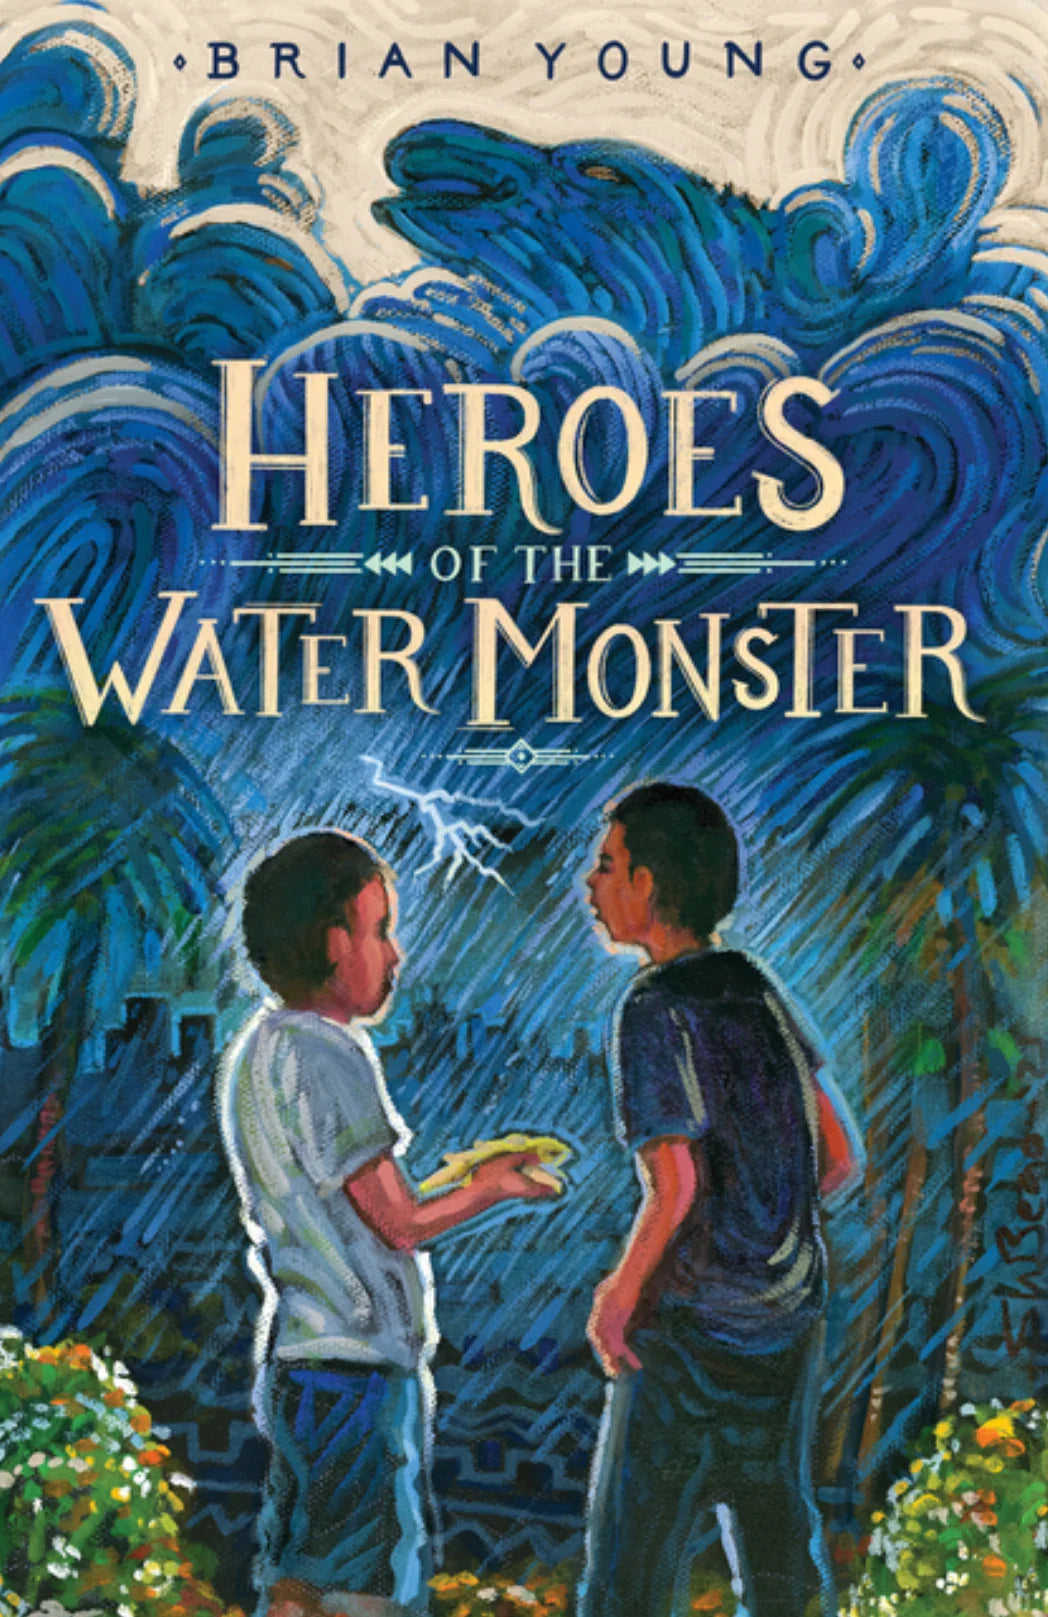 Heroes of the Water Monster by Brian Young